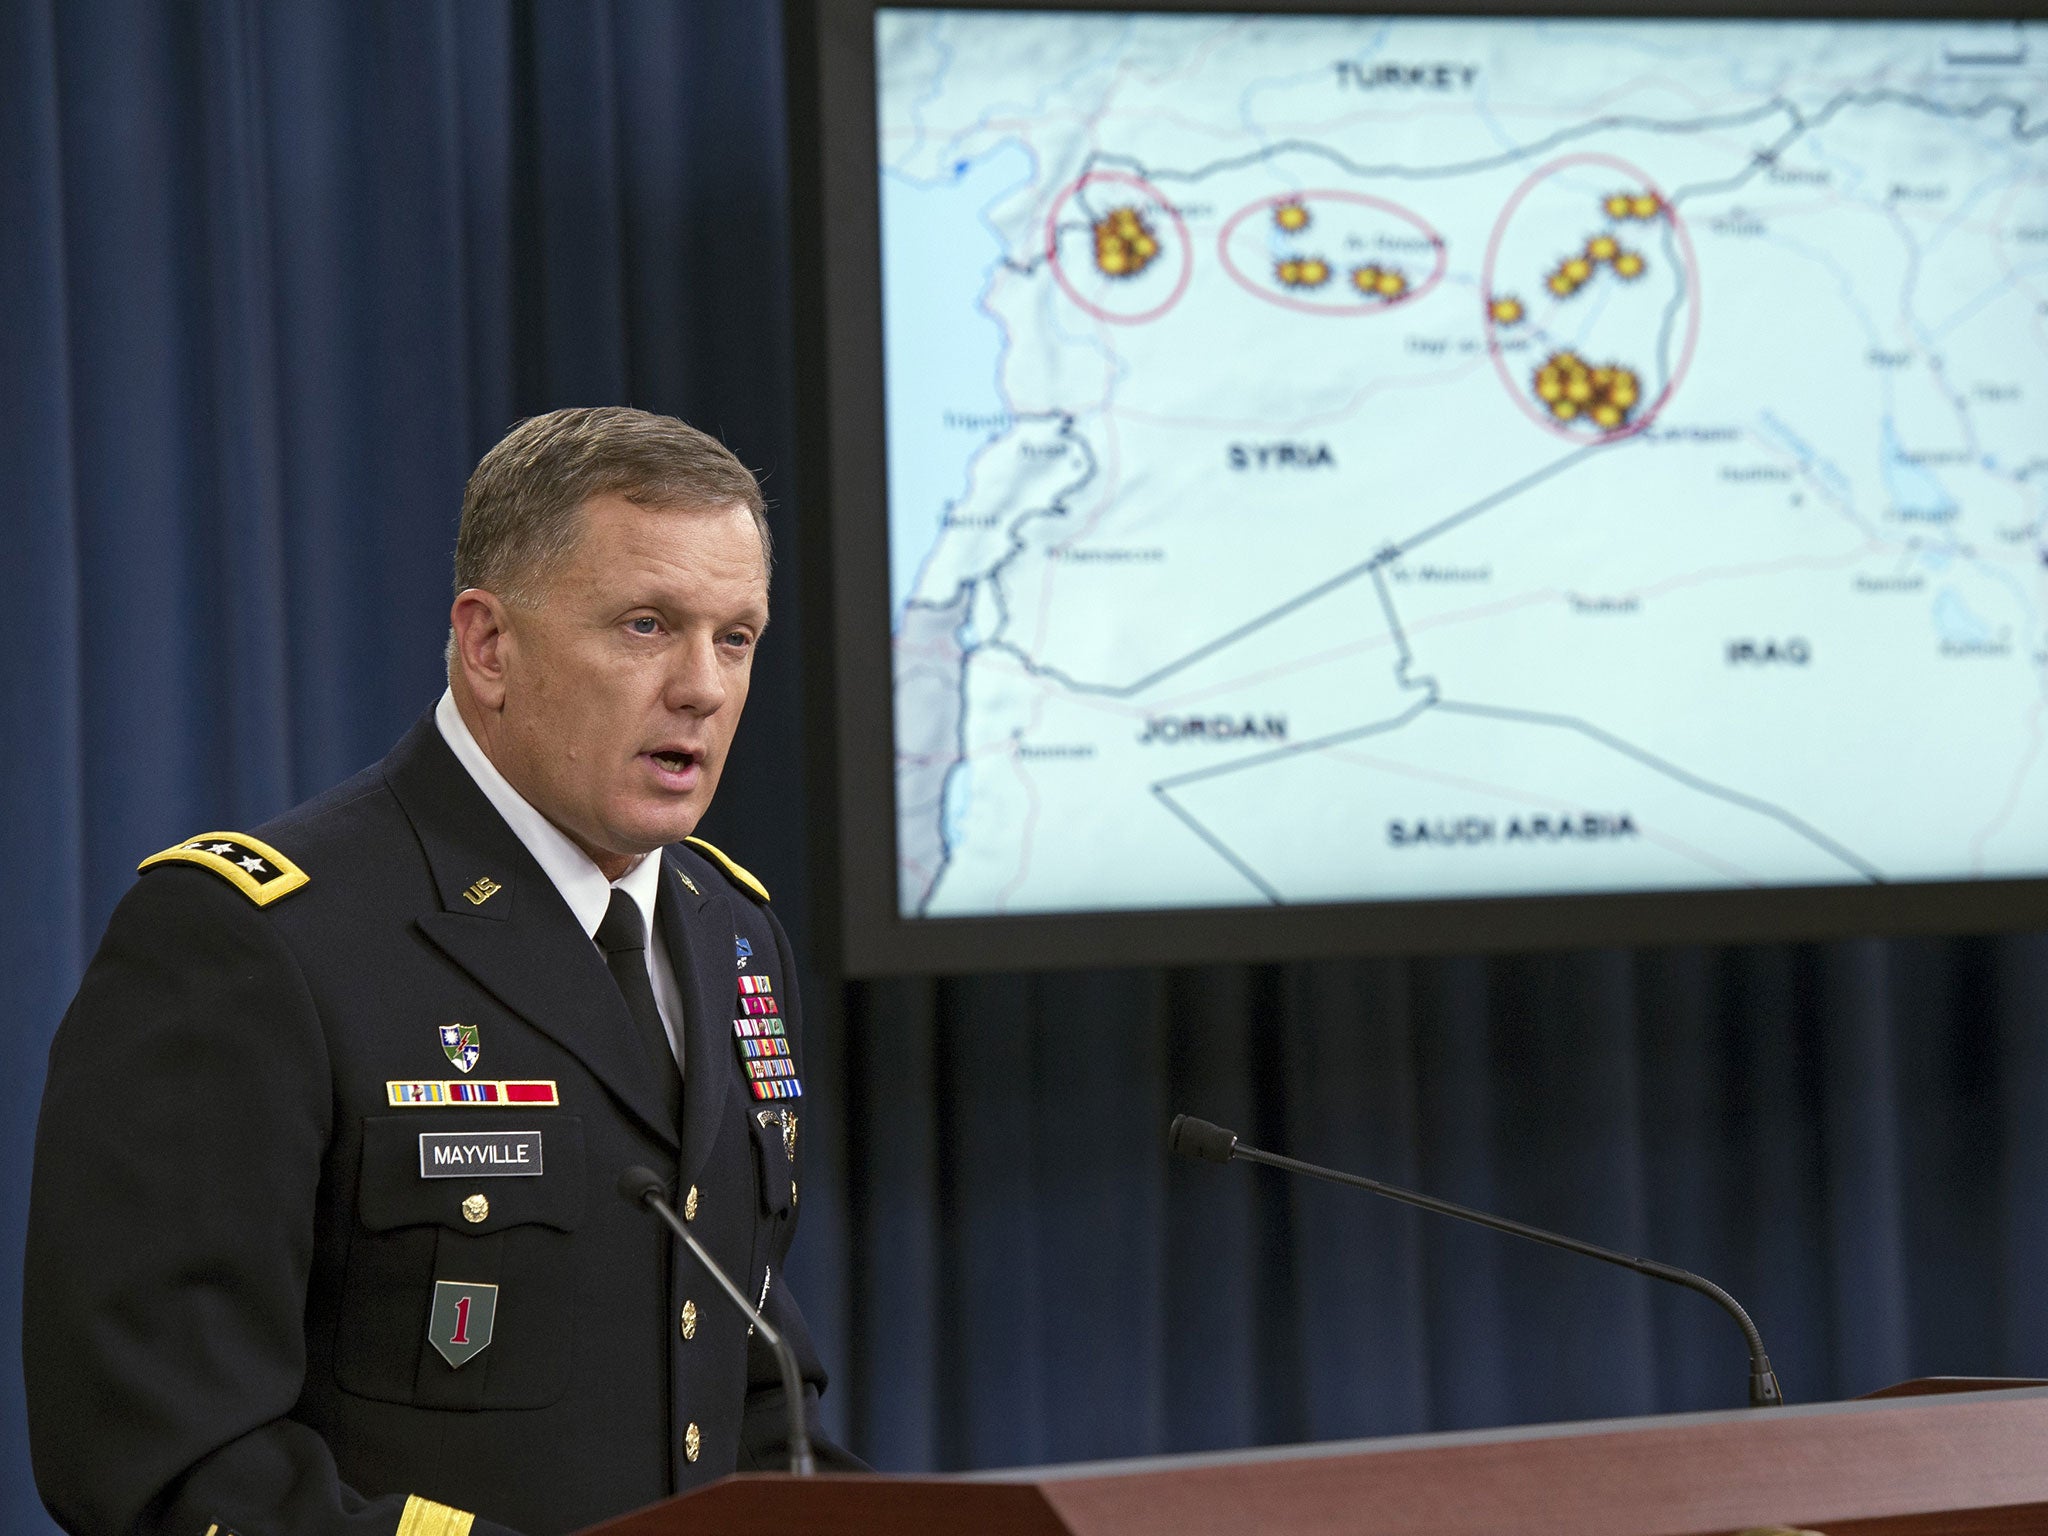 Army Lt. Gen. William Mayville said that the Khorasan Group was nearing the execution phase of an attack either in Europe or the homeland."